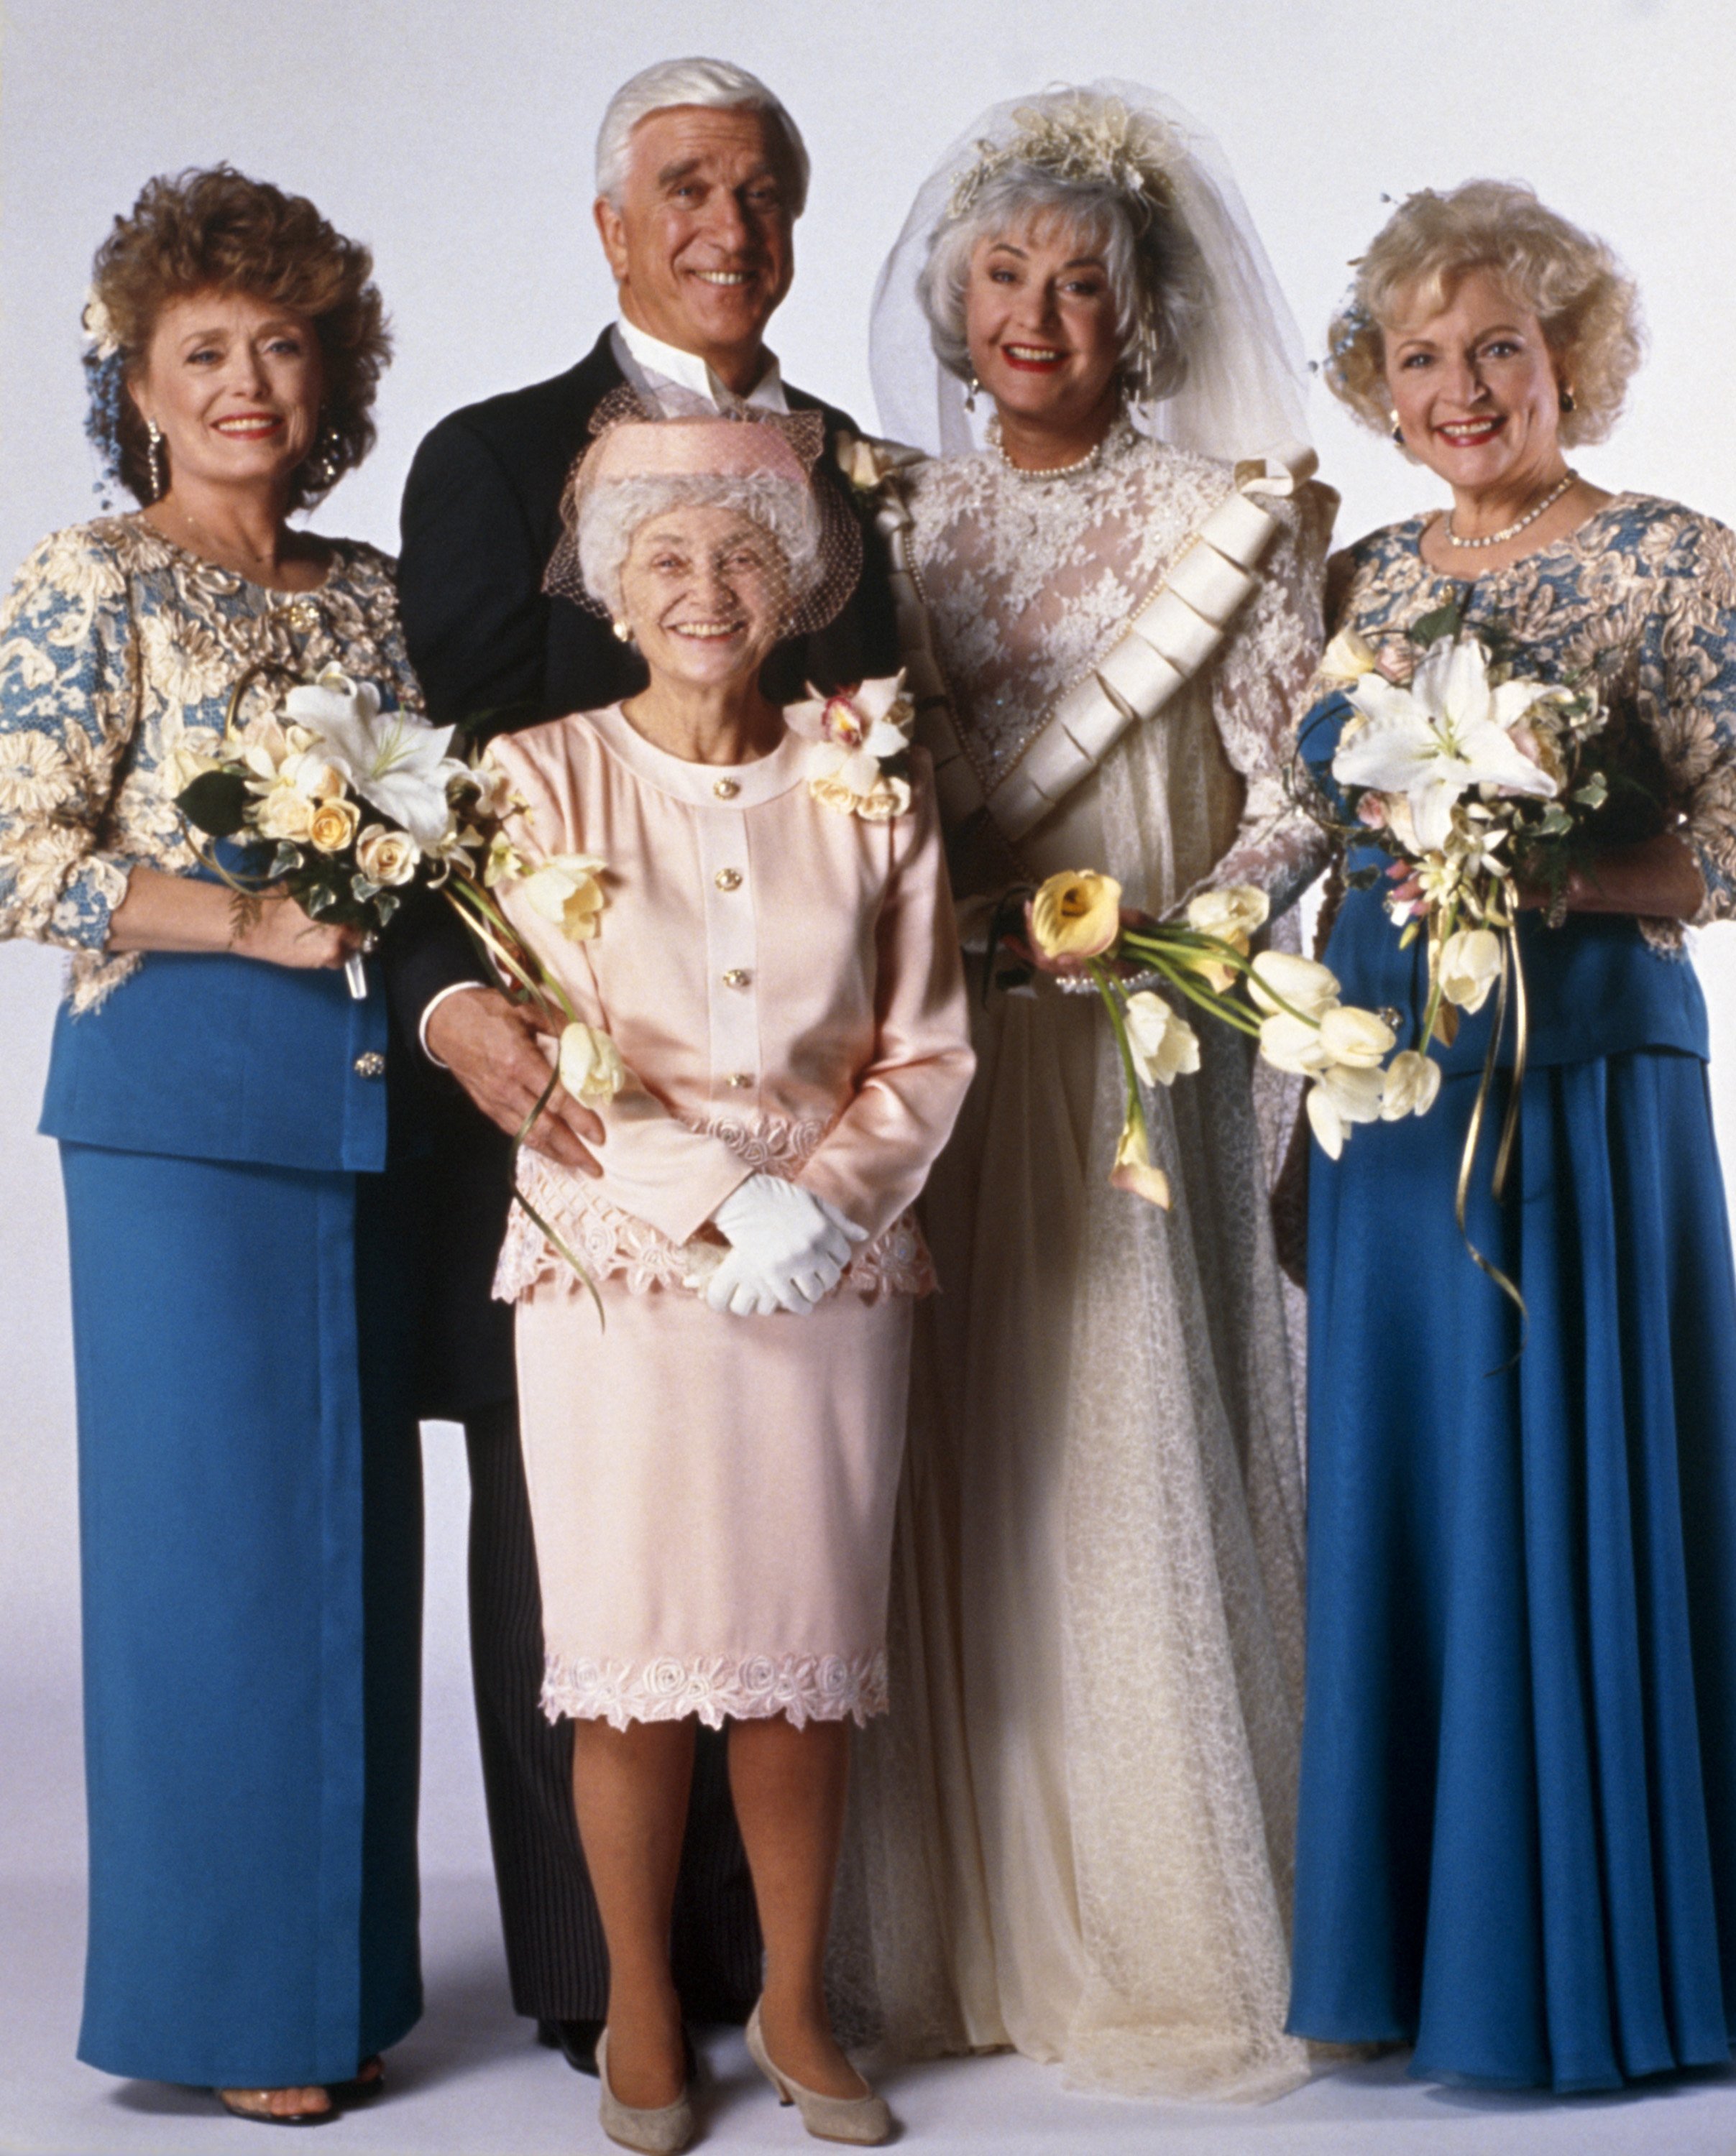 The cast of 'The Golden Girls' appear in promotional photos for the show's finale. The finale backed into The Golden Girls spinoff, 'The Golden Palace' 